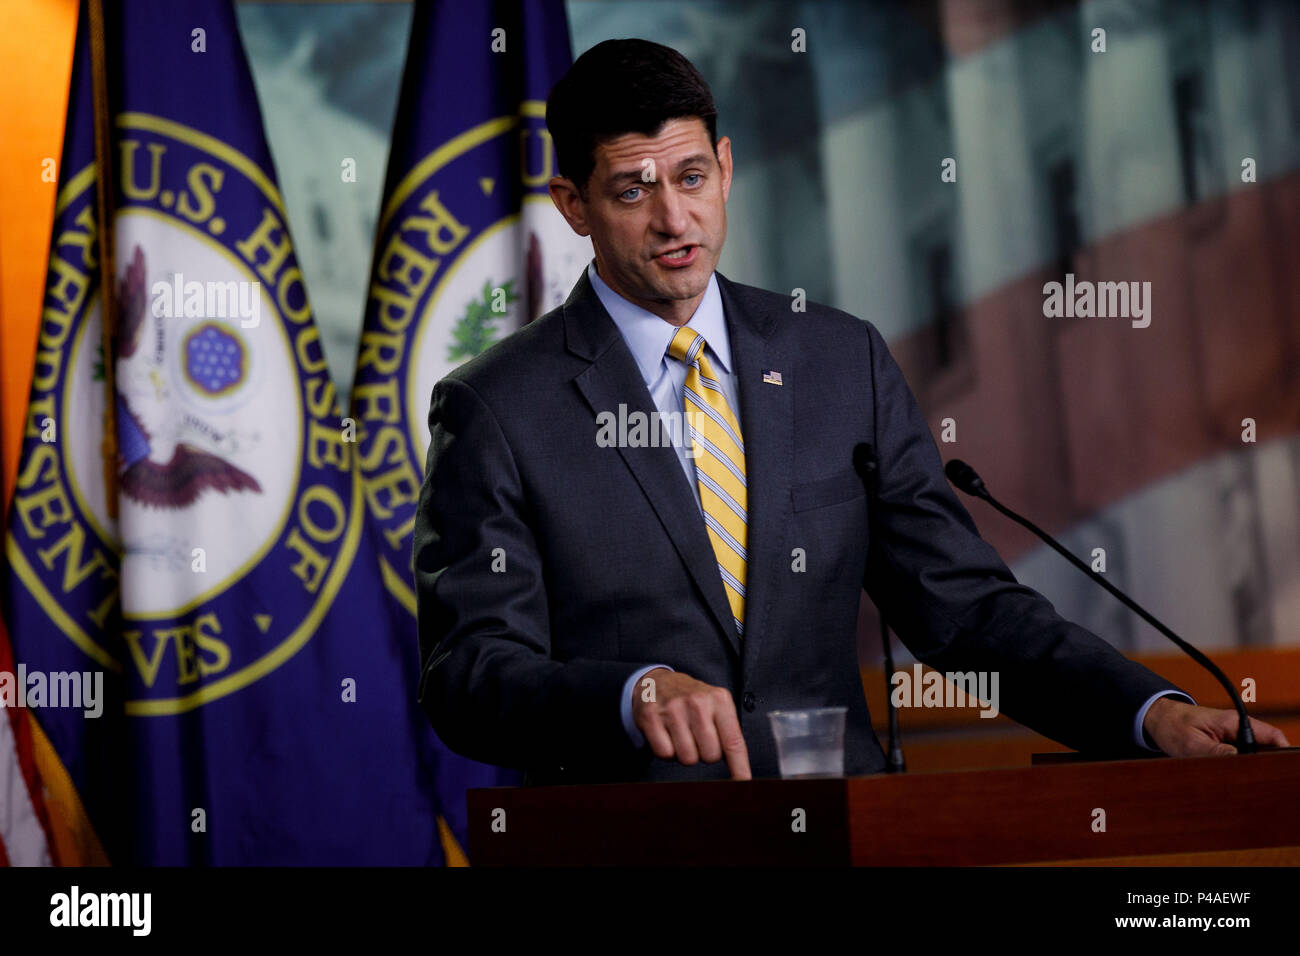 Washington, USA. 21st June, 2018. U.S. House Speaker Paul Ryan holds a press conference on the immigration bill on Capitol Hill in Washington, DC, the United States, on June 21, 2018. Republican leaders in the U.S. House of Representatives on Thursday delayed a vote on a 'moderate' immigration bill amid chaos over the White House practice of separating families who illegally cross the U.S. border. Credit: Ting Shen/Xinhua/Alamy Live News Stock Photo